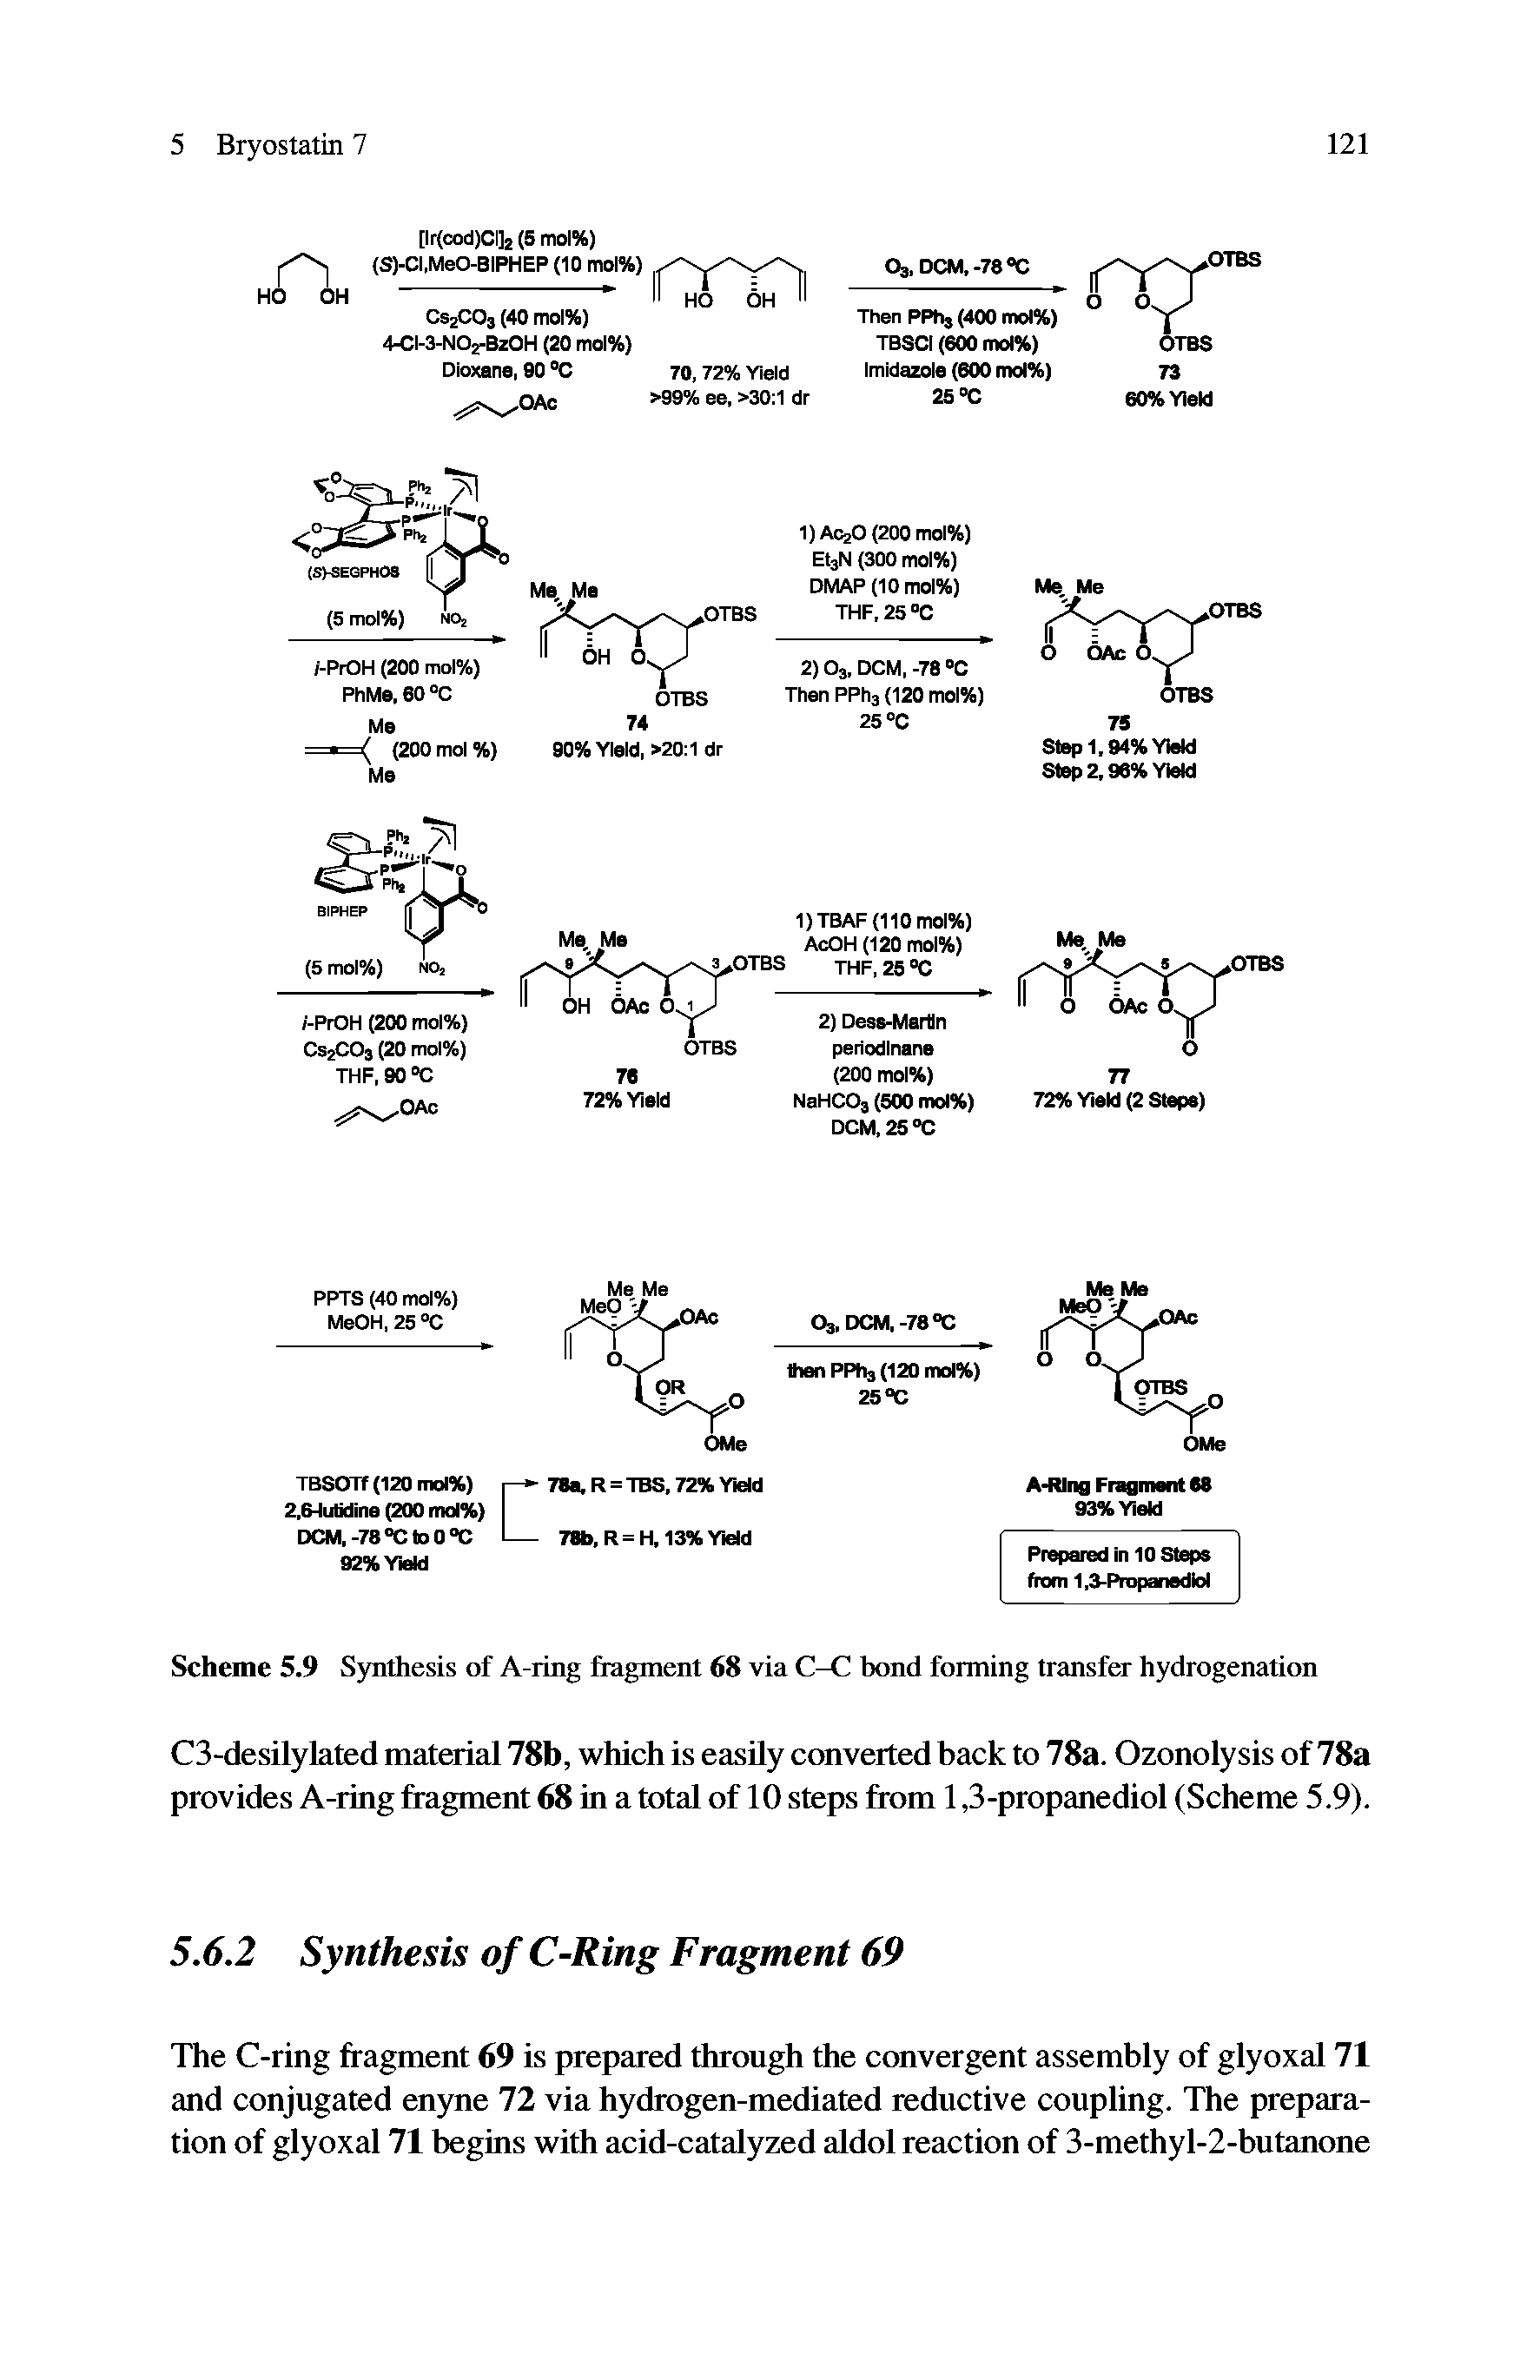 Scheme 5.9 Synthesis of A-ring fragment 68 via C-C bond forming transfer hydrogenation...